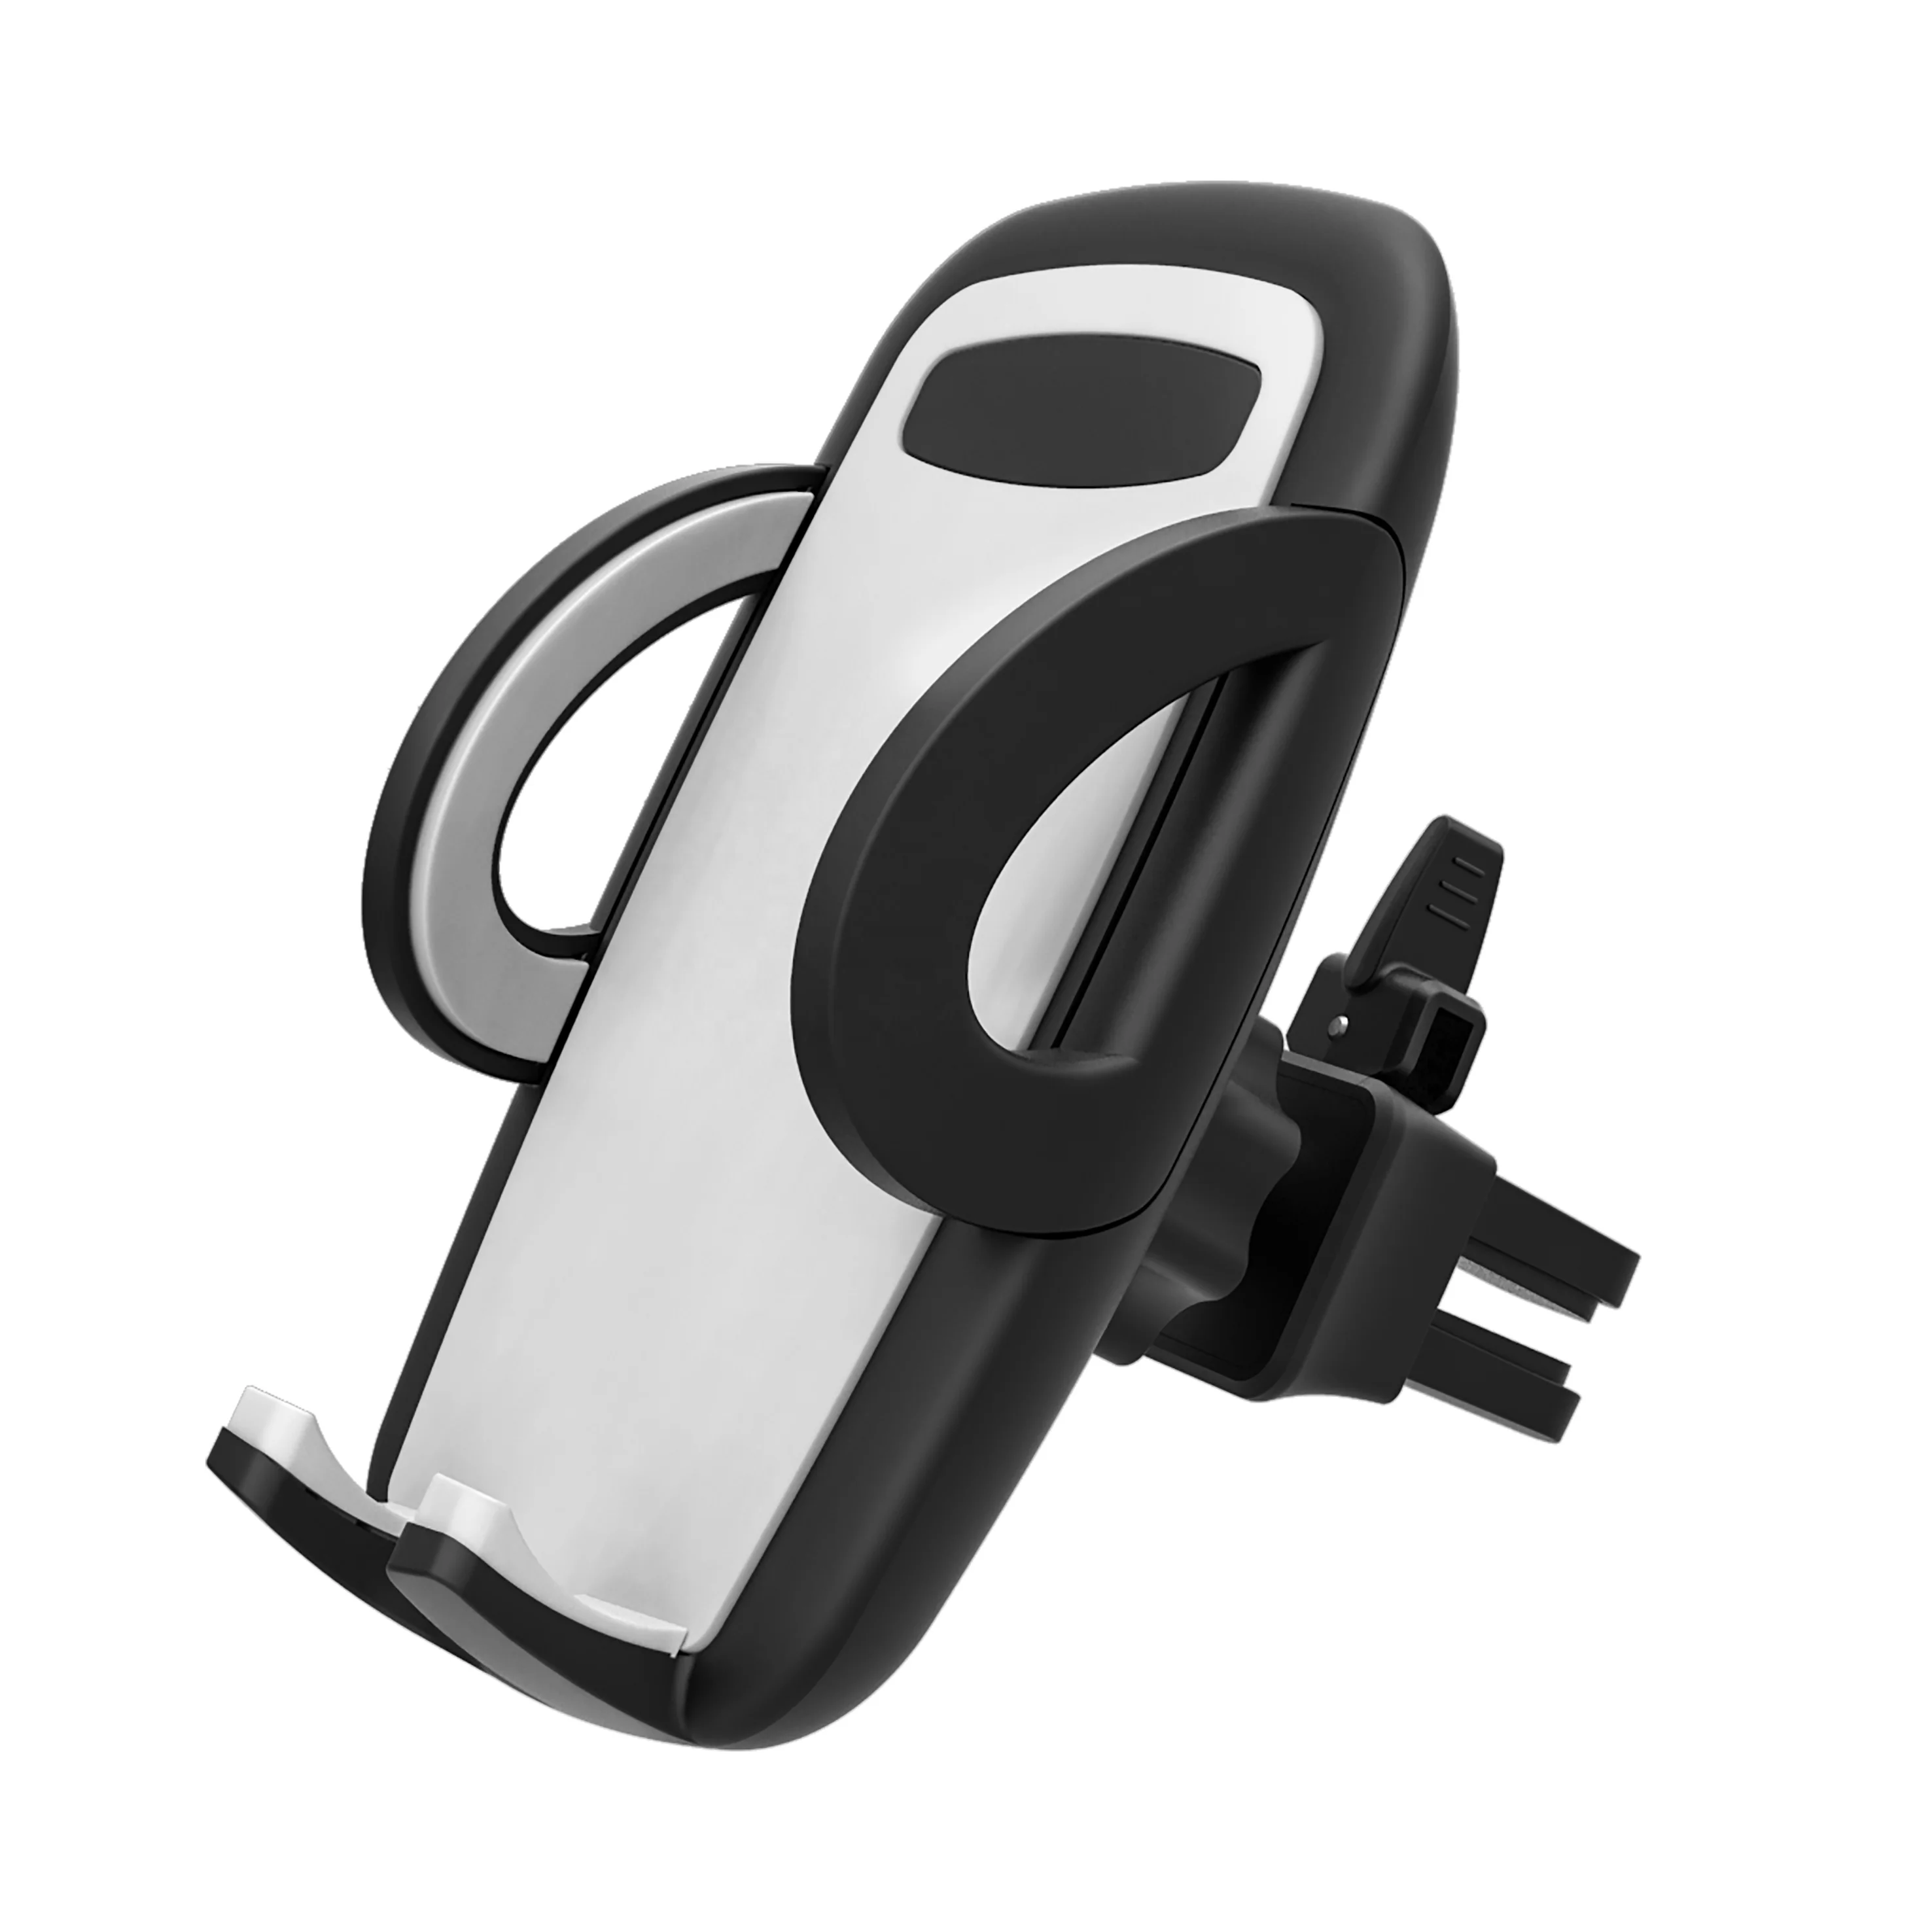 

Universal 360 Degree Rotation Car Mount Phone Holder Air Vent Cell Phone Cradle Wholesale Factory Price